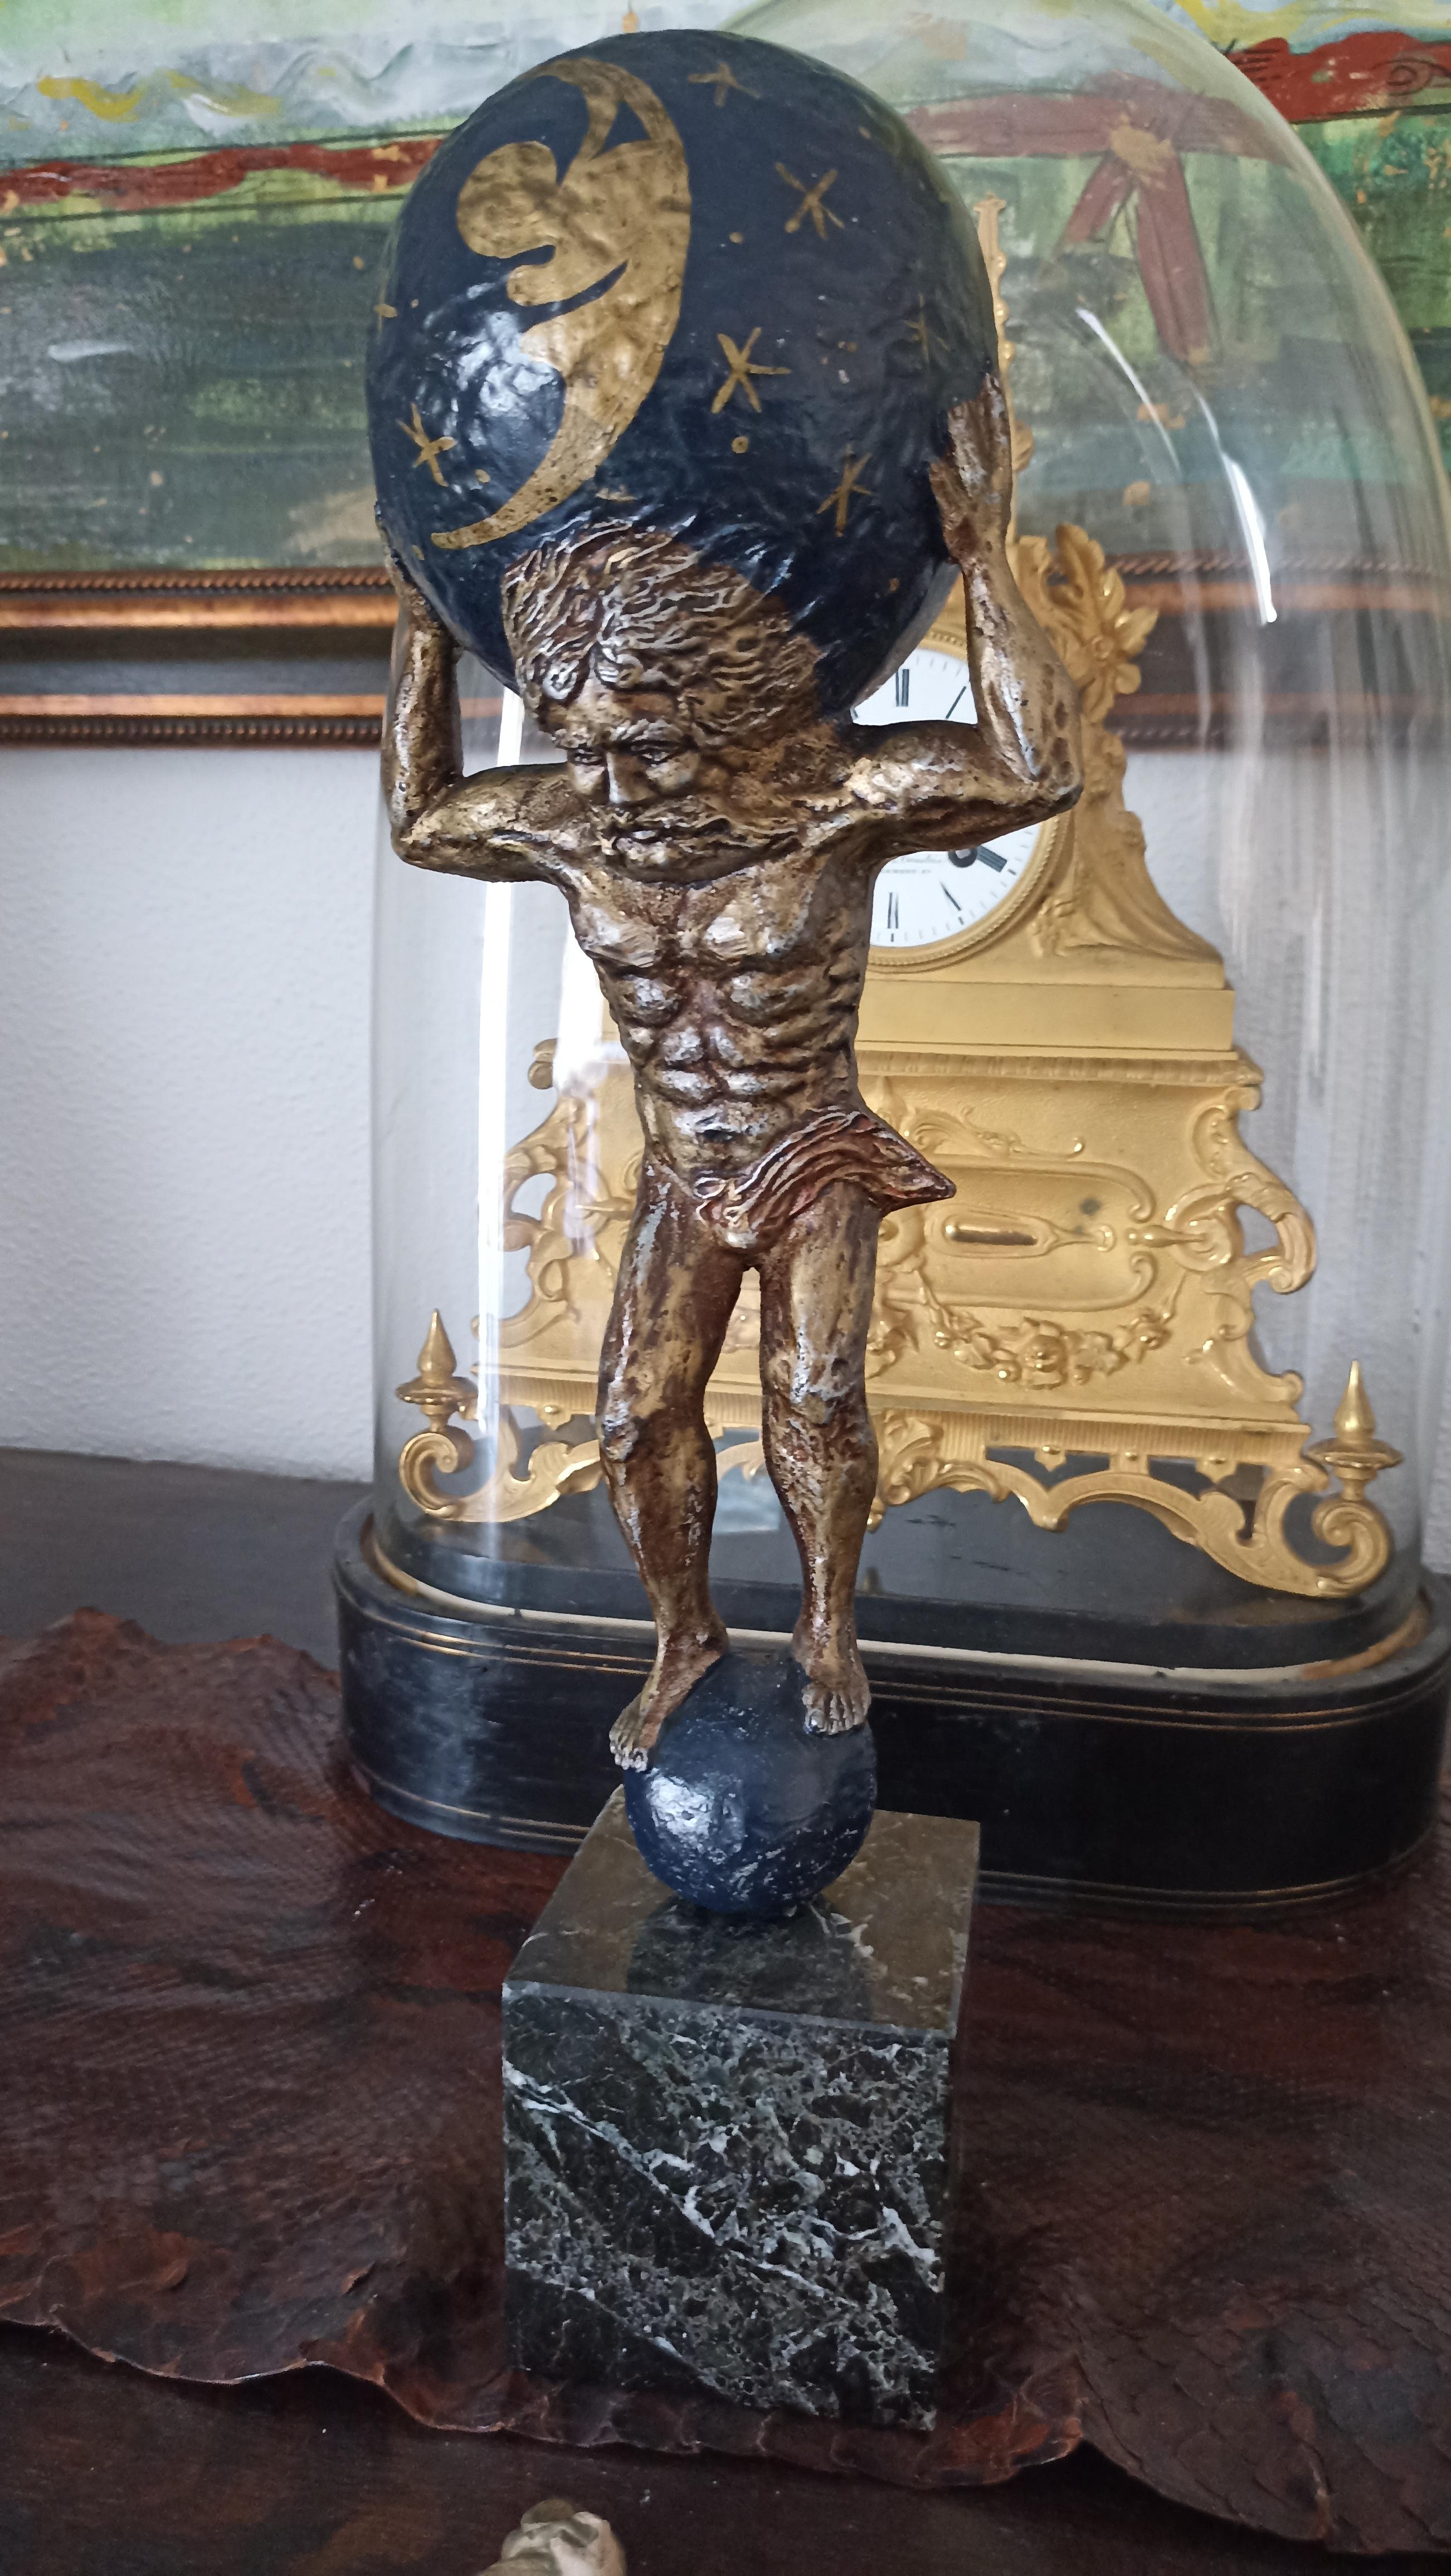 Grand Tour Highly Decorative 18th Century Cold Painted Solid Bronze Atlas Figure &Cherubs For Sale